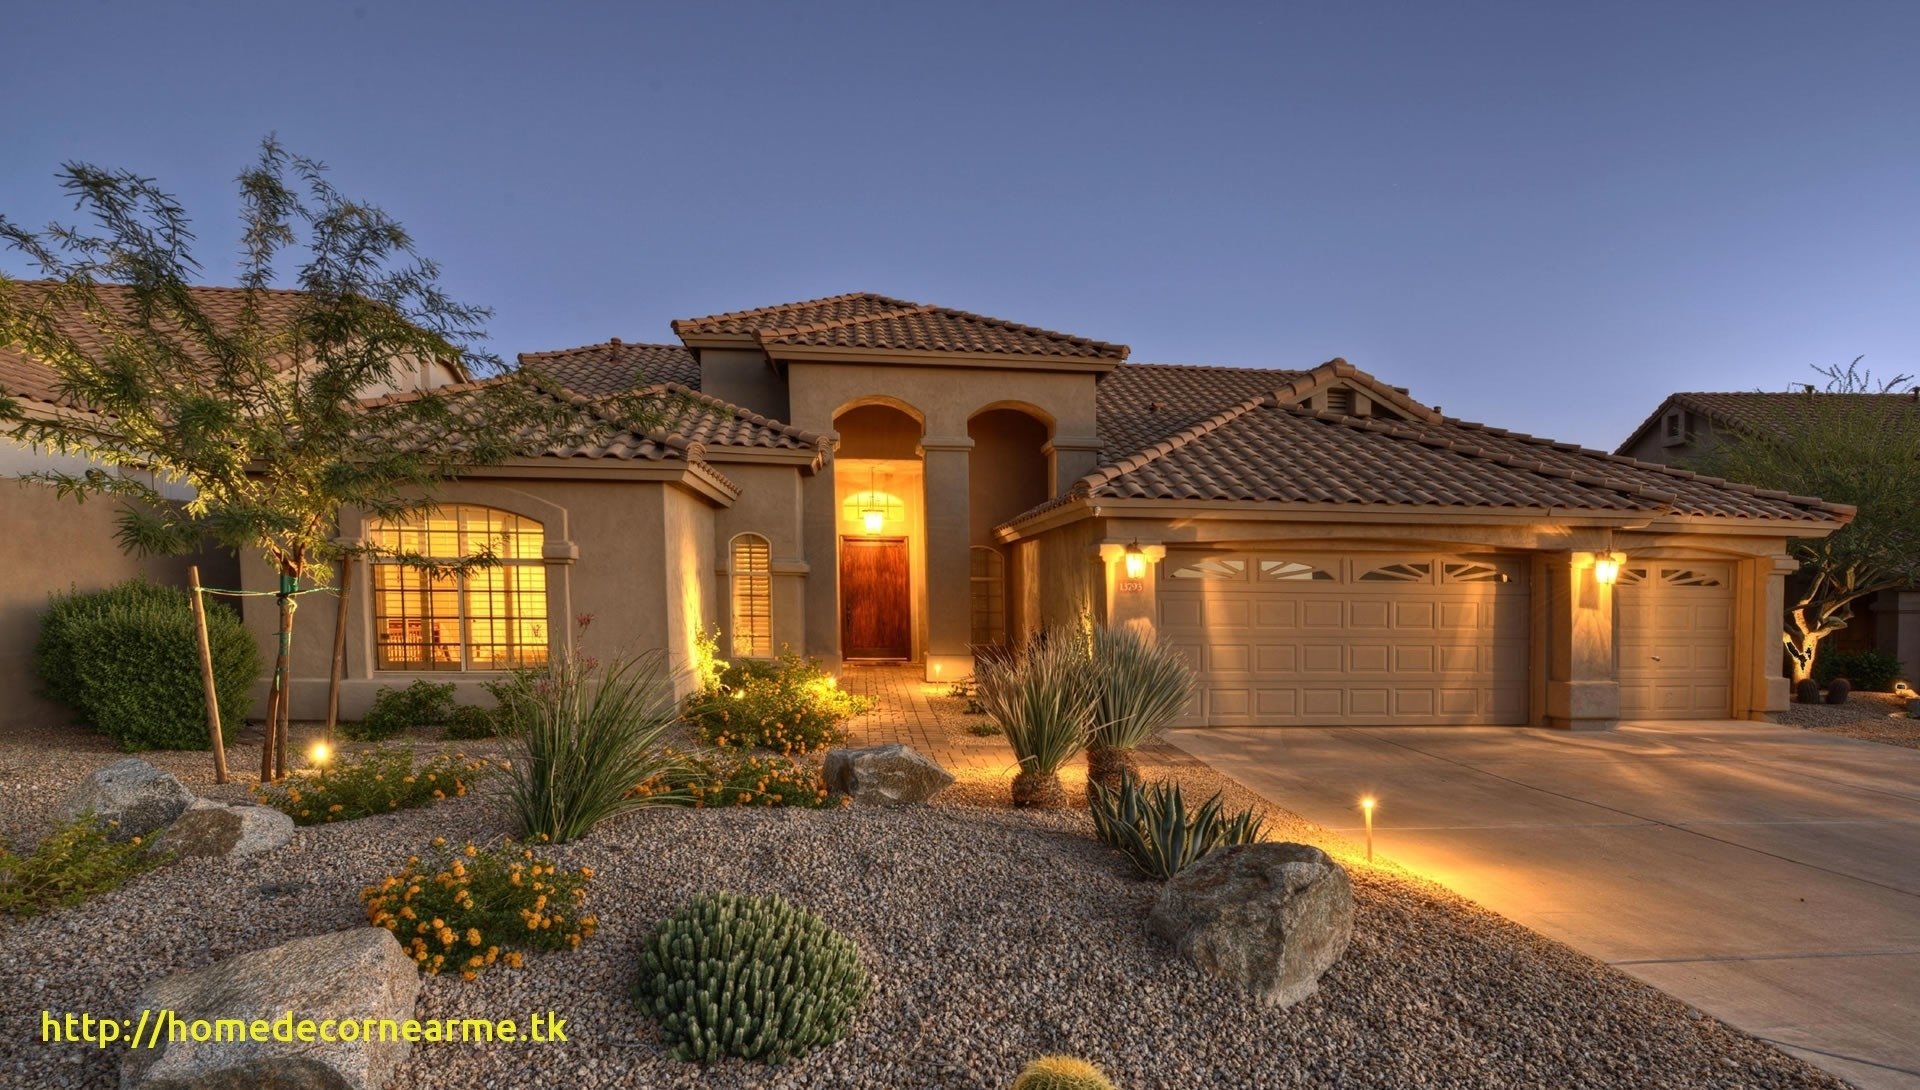 10 Stunning Are Rent To Own Homes A Good Idea cheap houses for rent in phoenix arizona current house for rent 2022